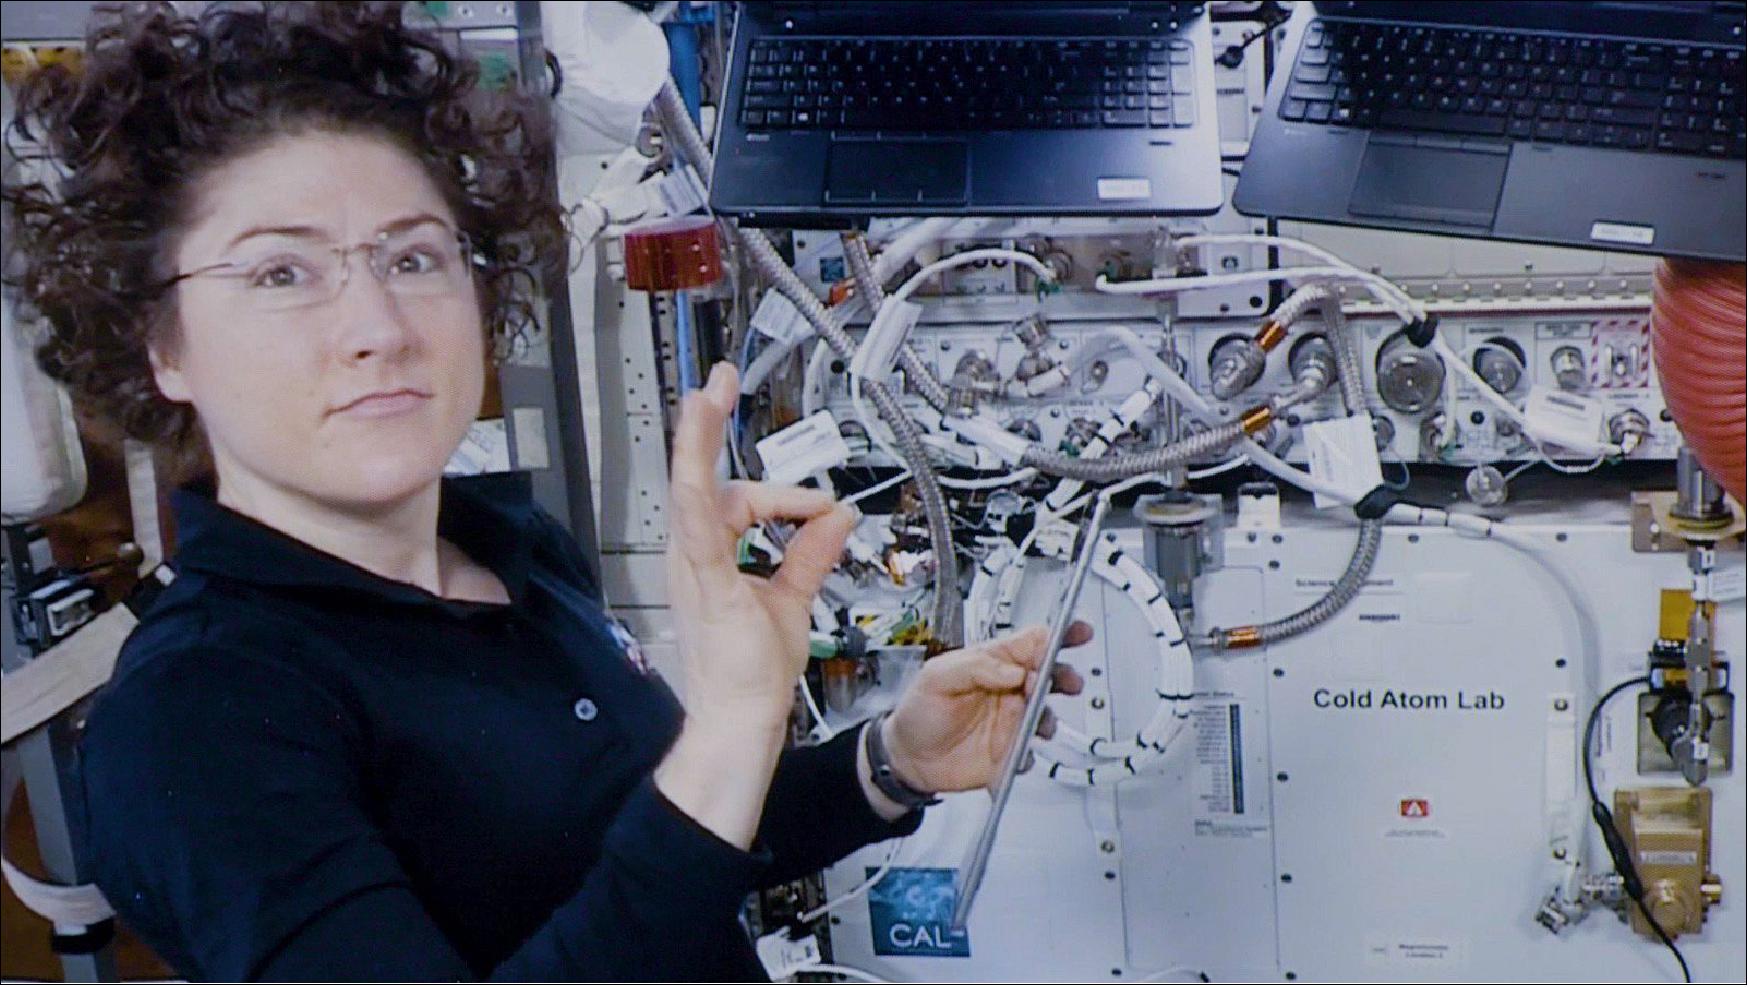 Figure 22: Astronaut Christina Koch assists with a hardware upgrade for NASA's Cold Atom Lab aboard the International Space Station in January 2020 (image credit: NASA-International Space Station)